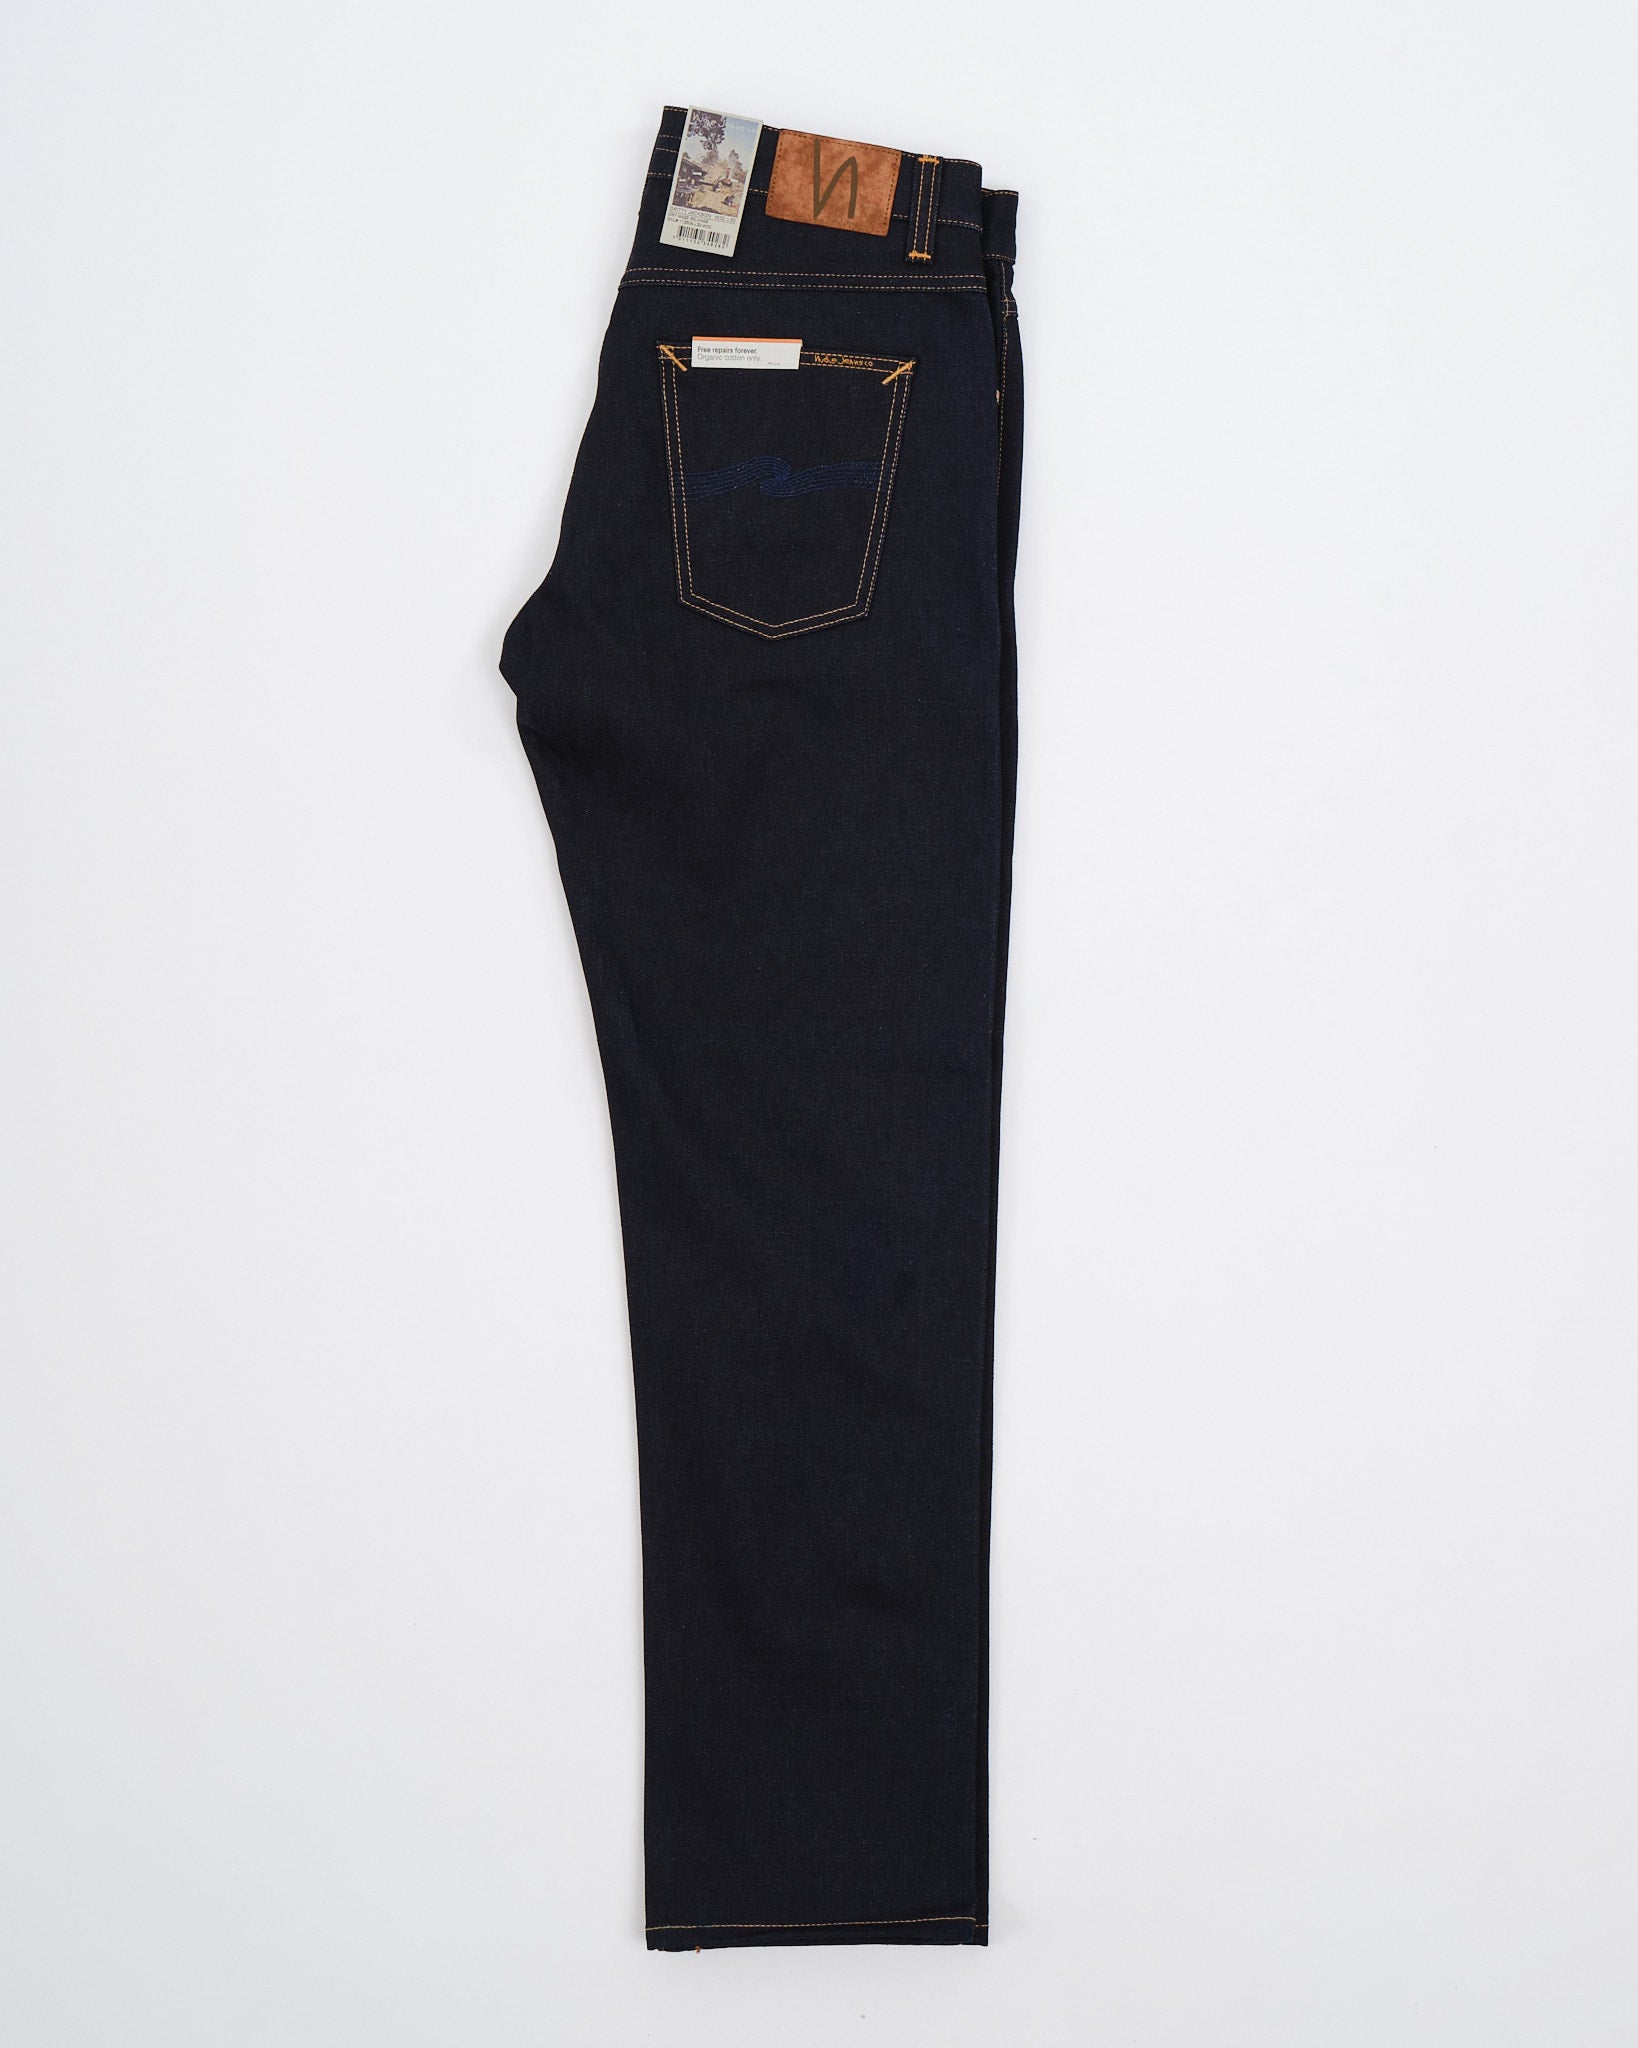 Nudie Jeans Gritty | Gritty Jackson Dry Maze Selvage | Meadow